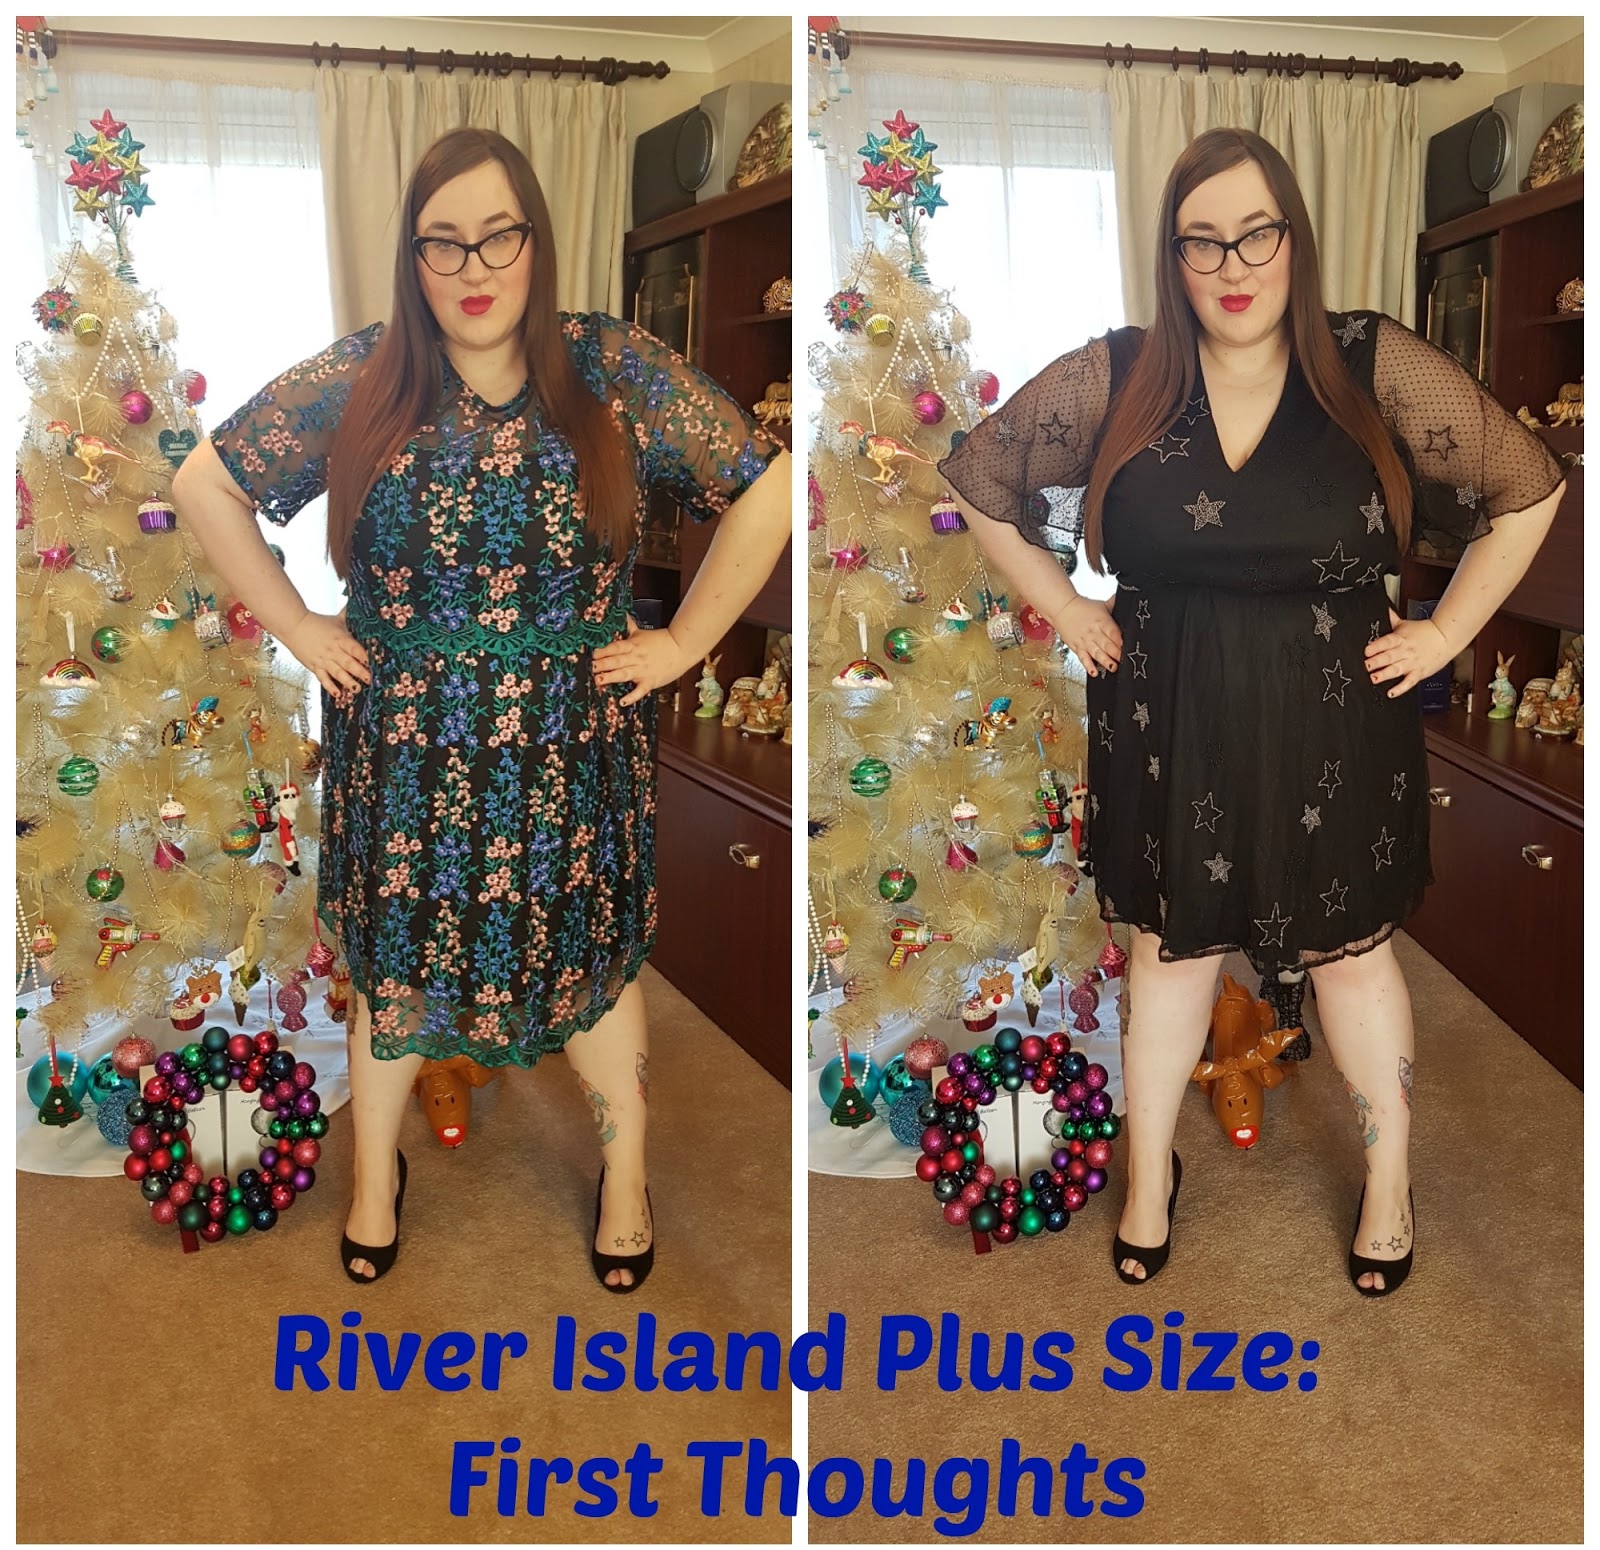 River Island Plus Size: First Thoughts ...